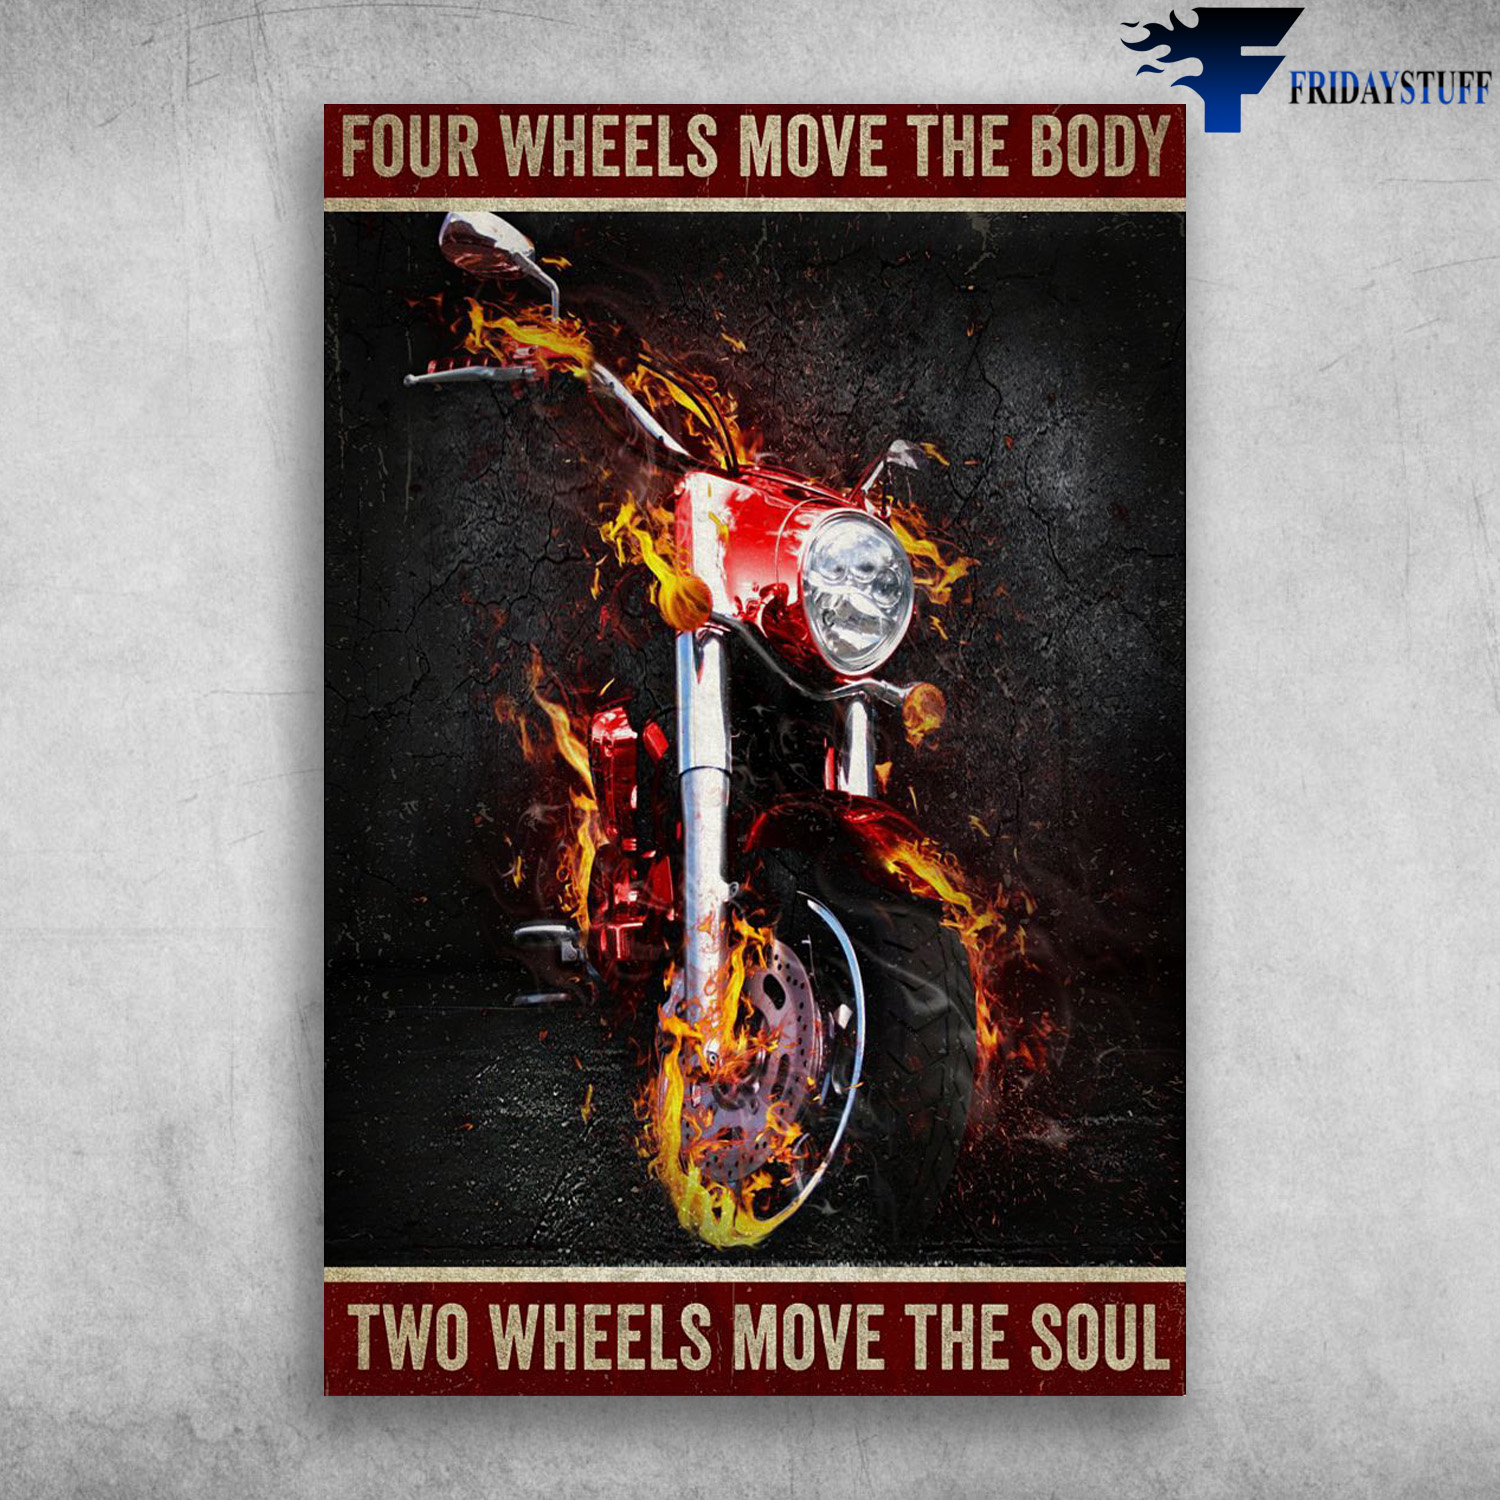 Cruiser Motorcycle - Four Whells Move The Body, Two wheels move the soulm, Fire Motorbike